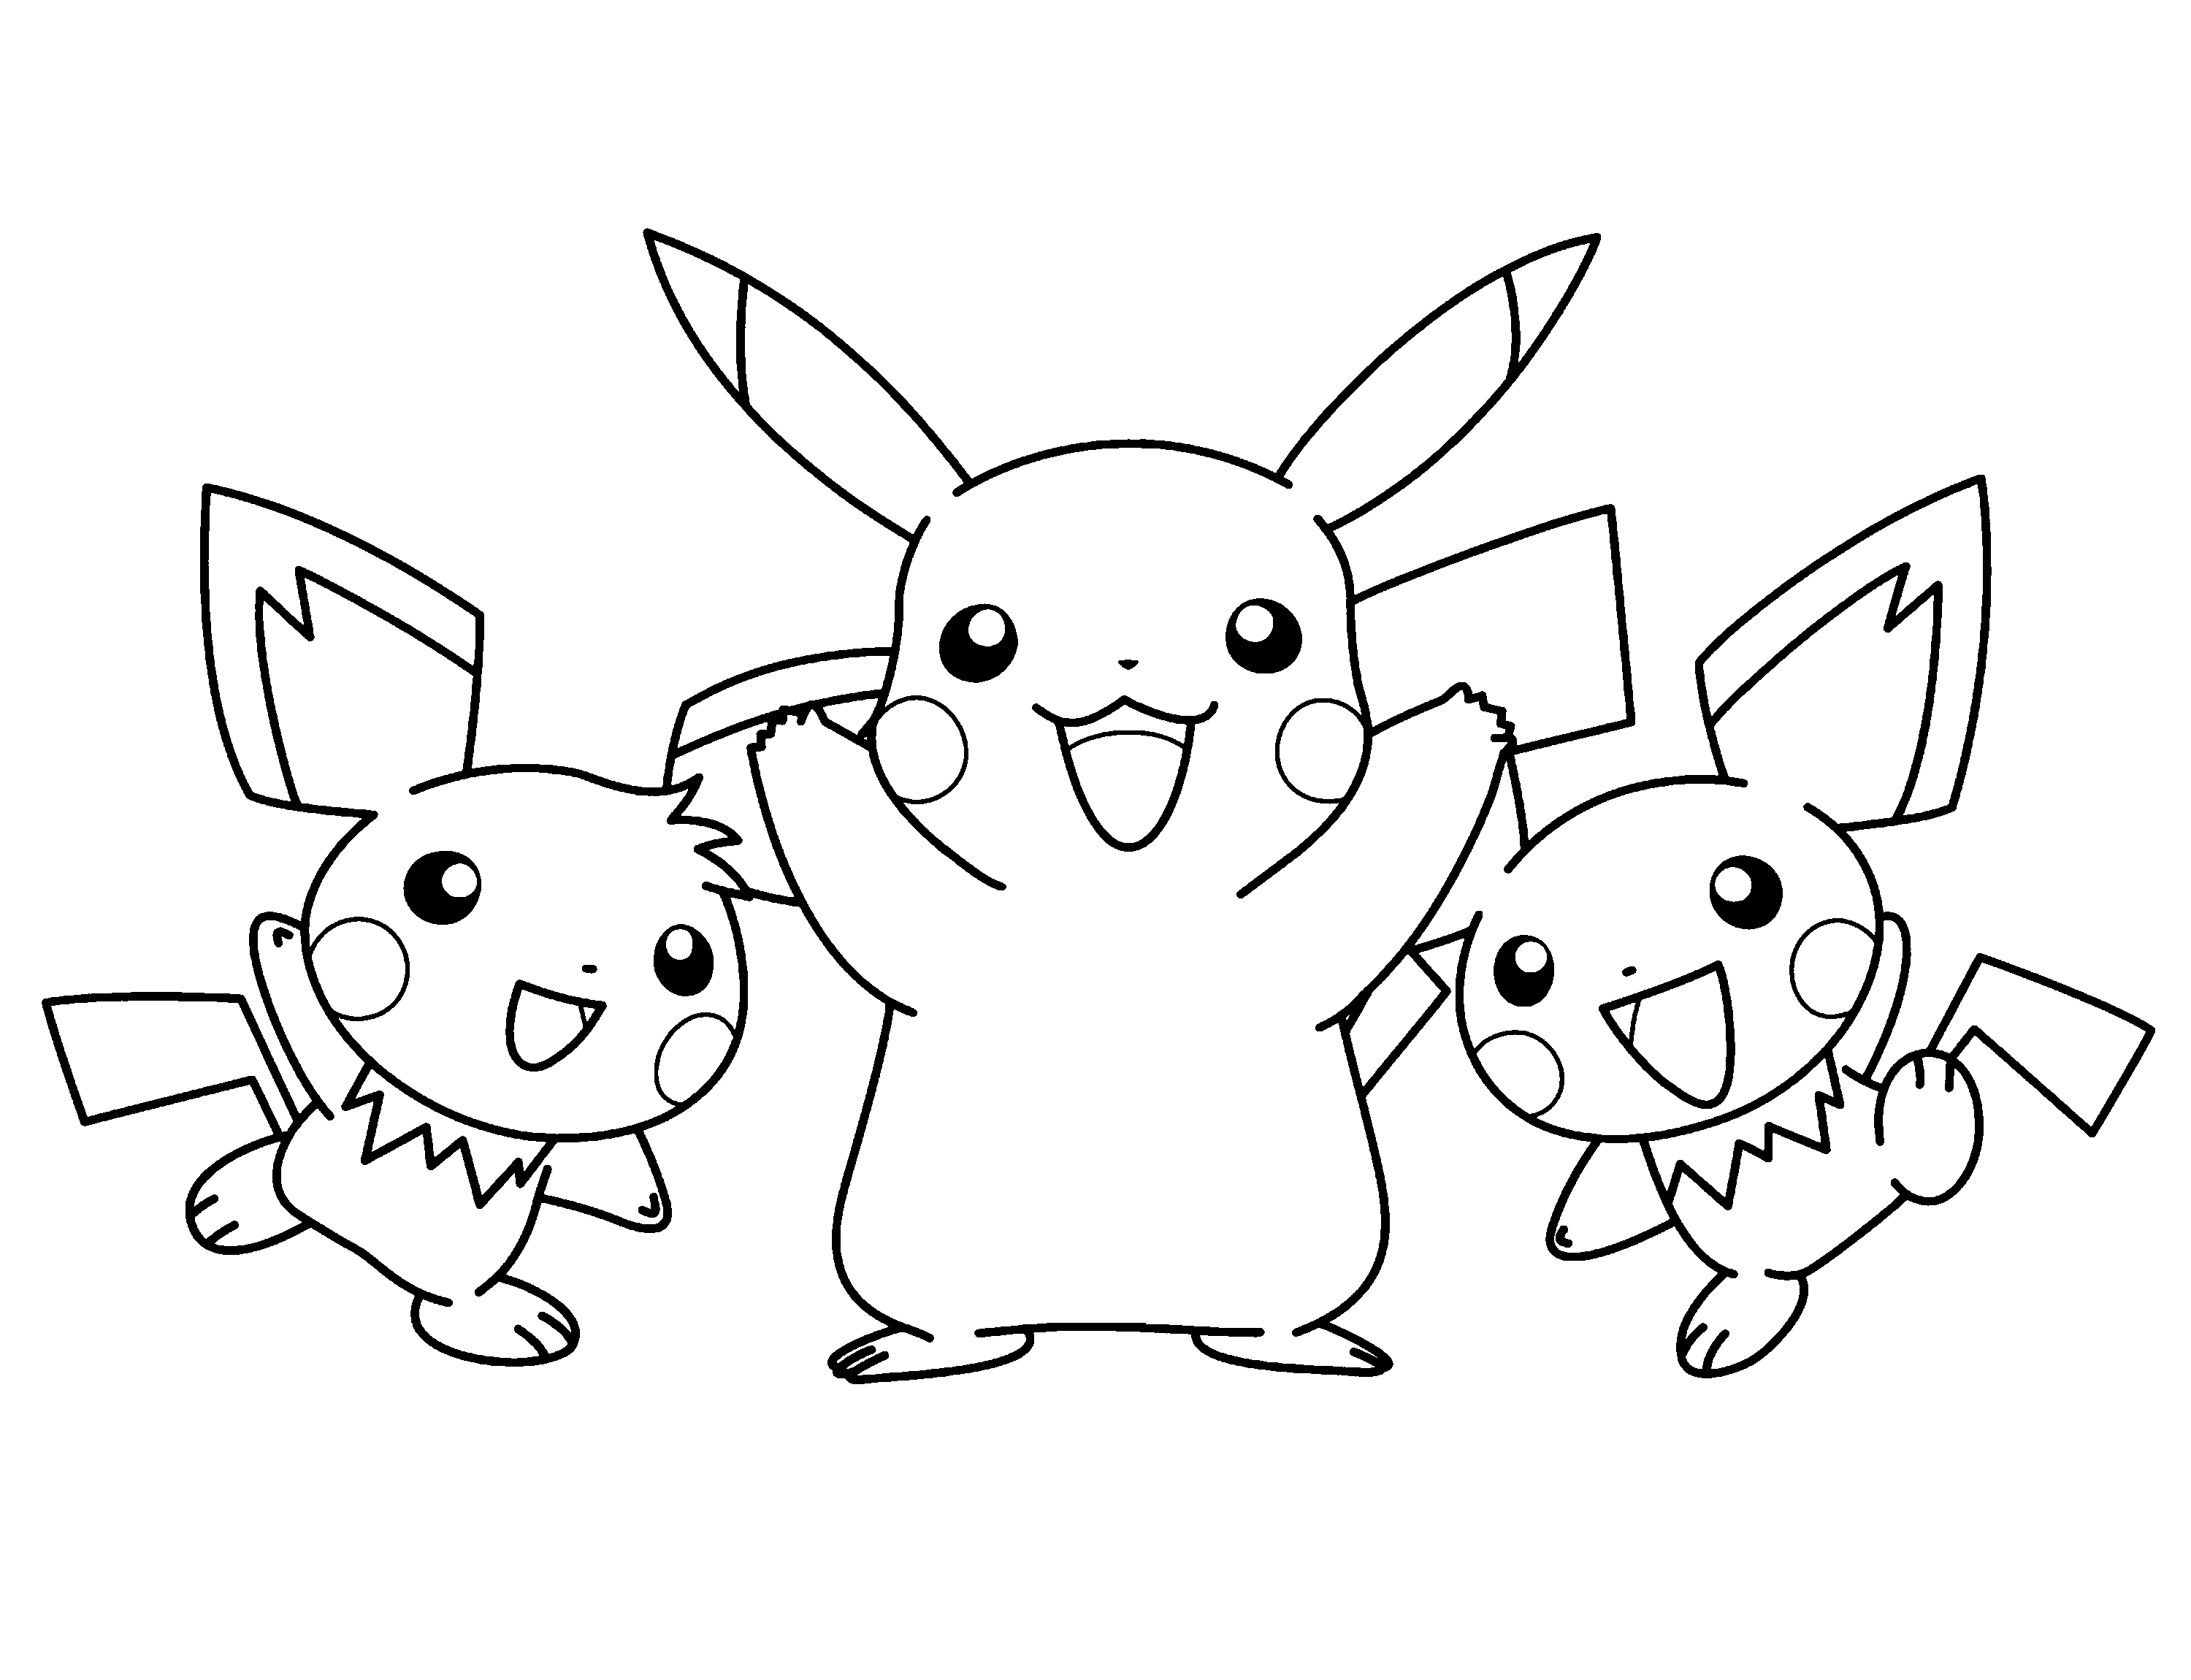 Cartoon Pokemon Coloring Pages - Coloring Pages For All Ages